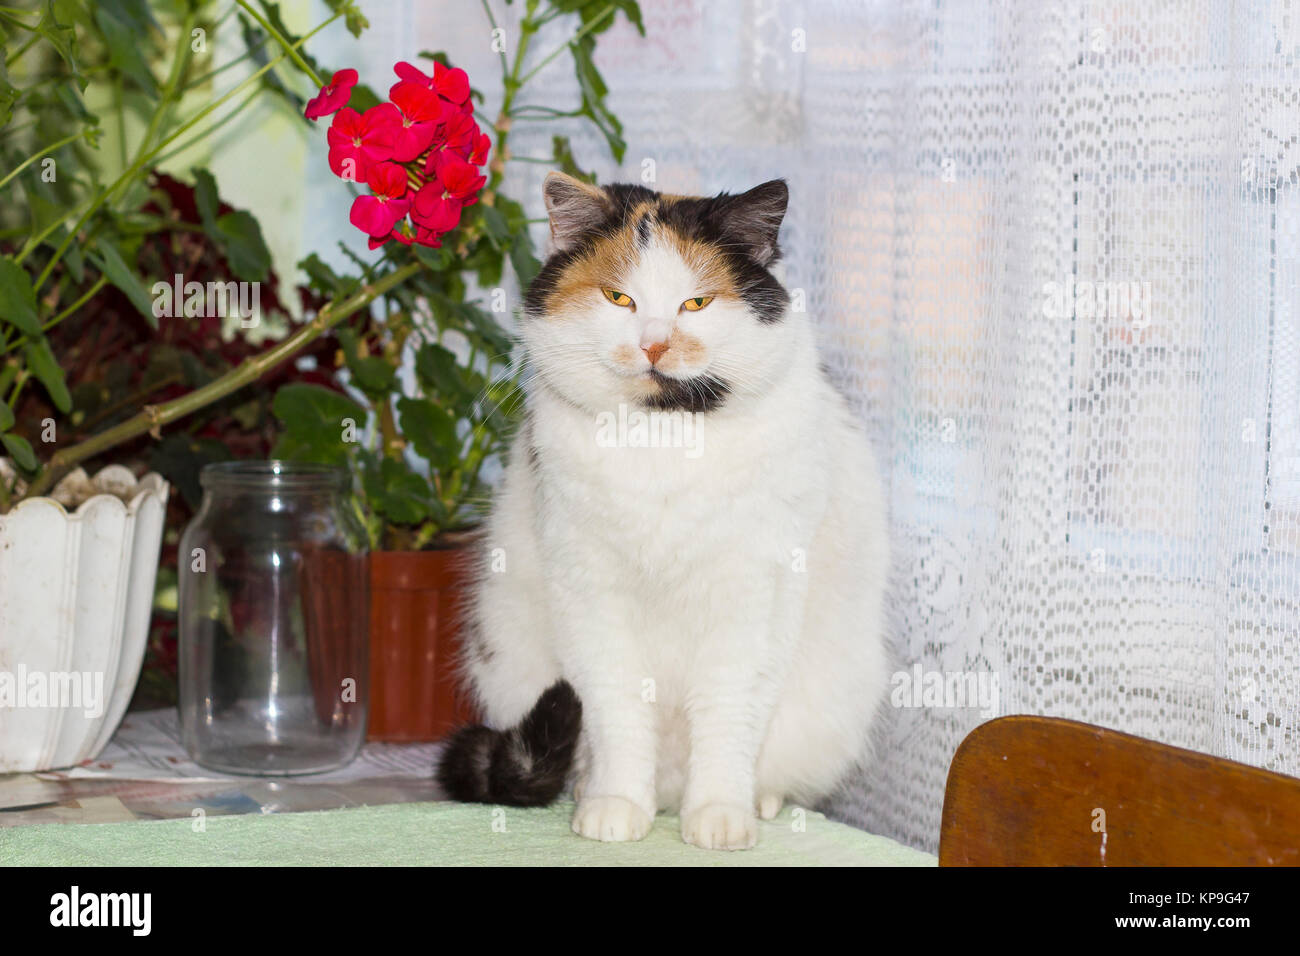 Beautiful calico cat sits on table near pots with flowers Stock Photo